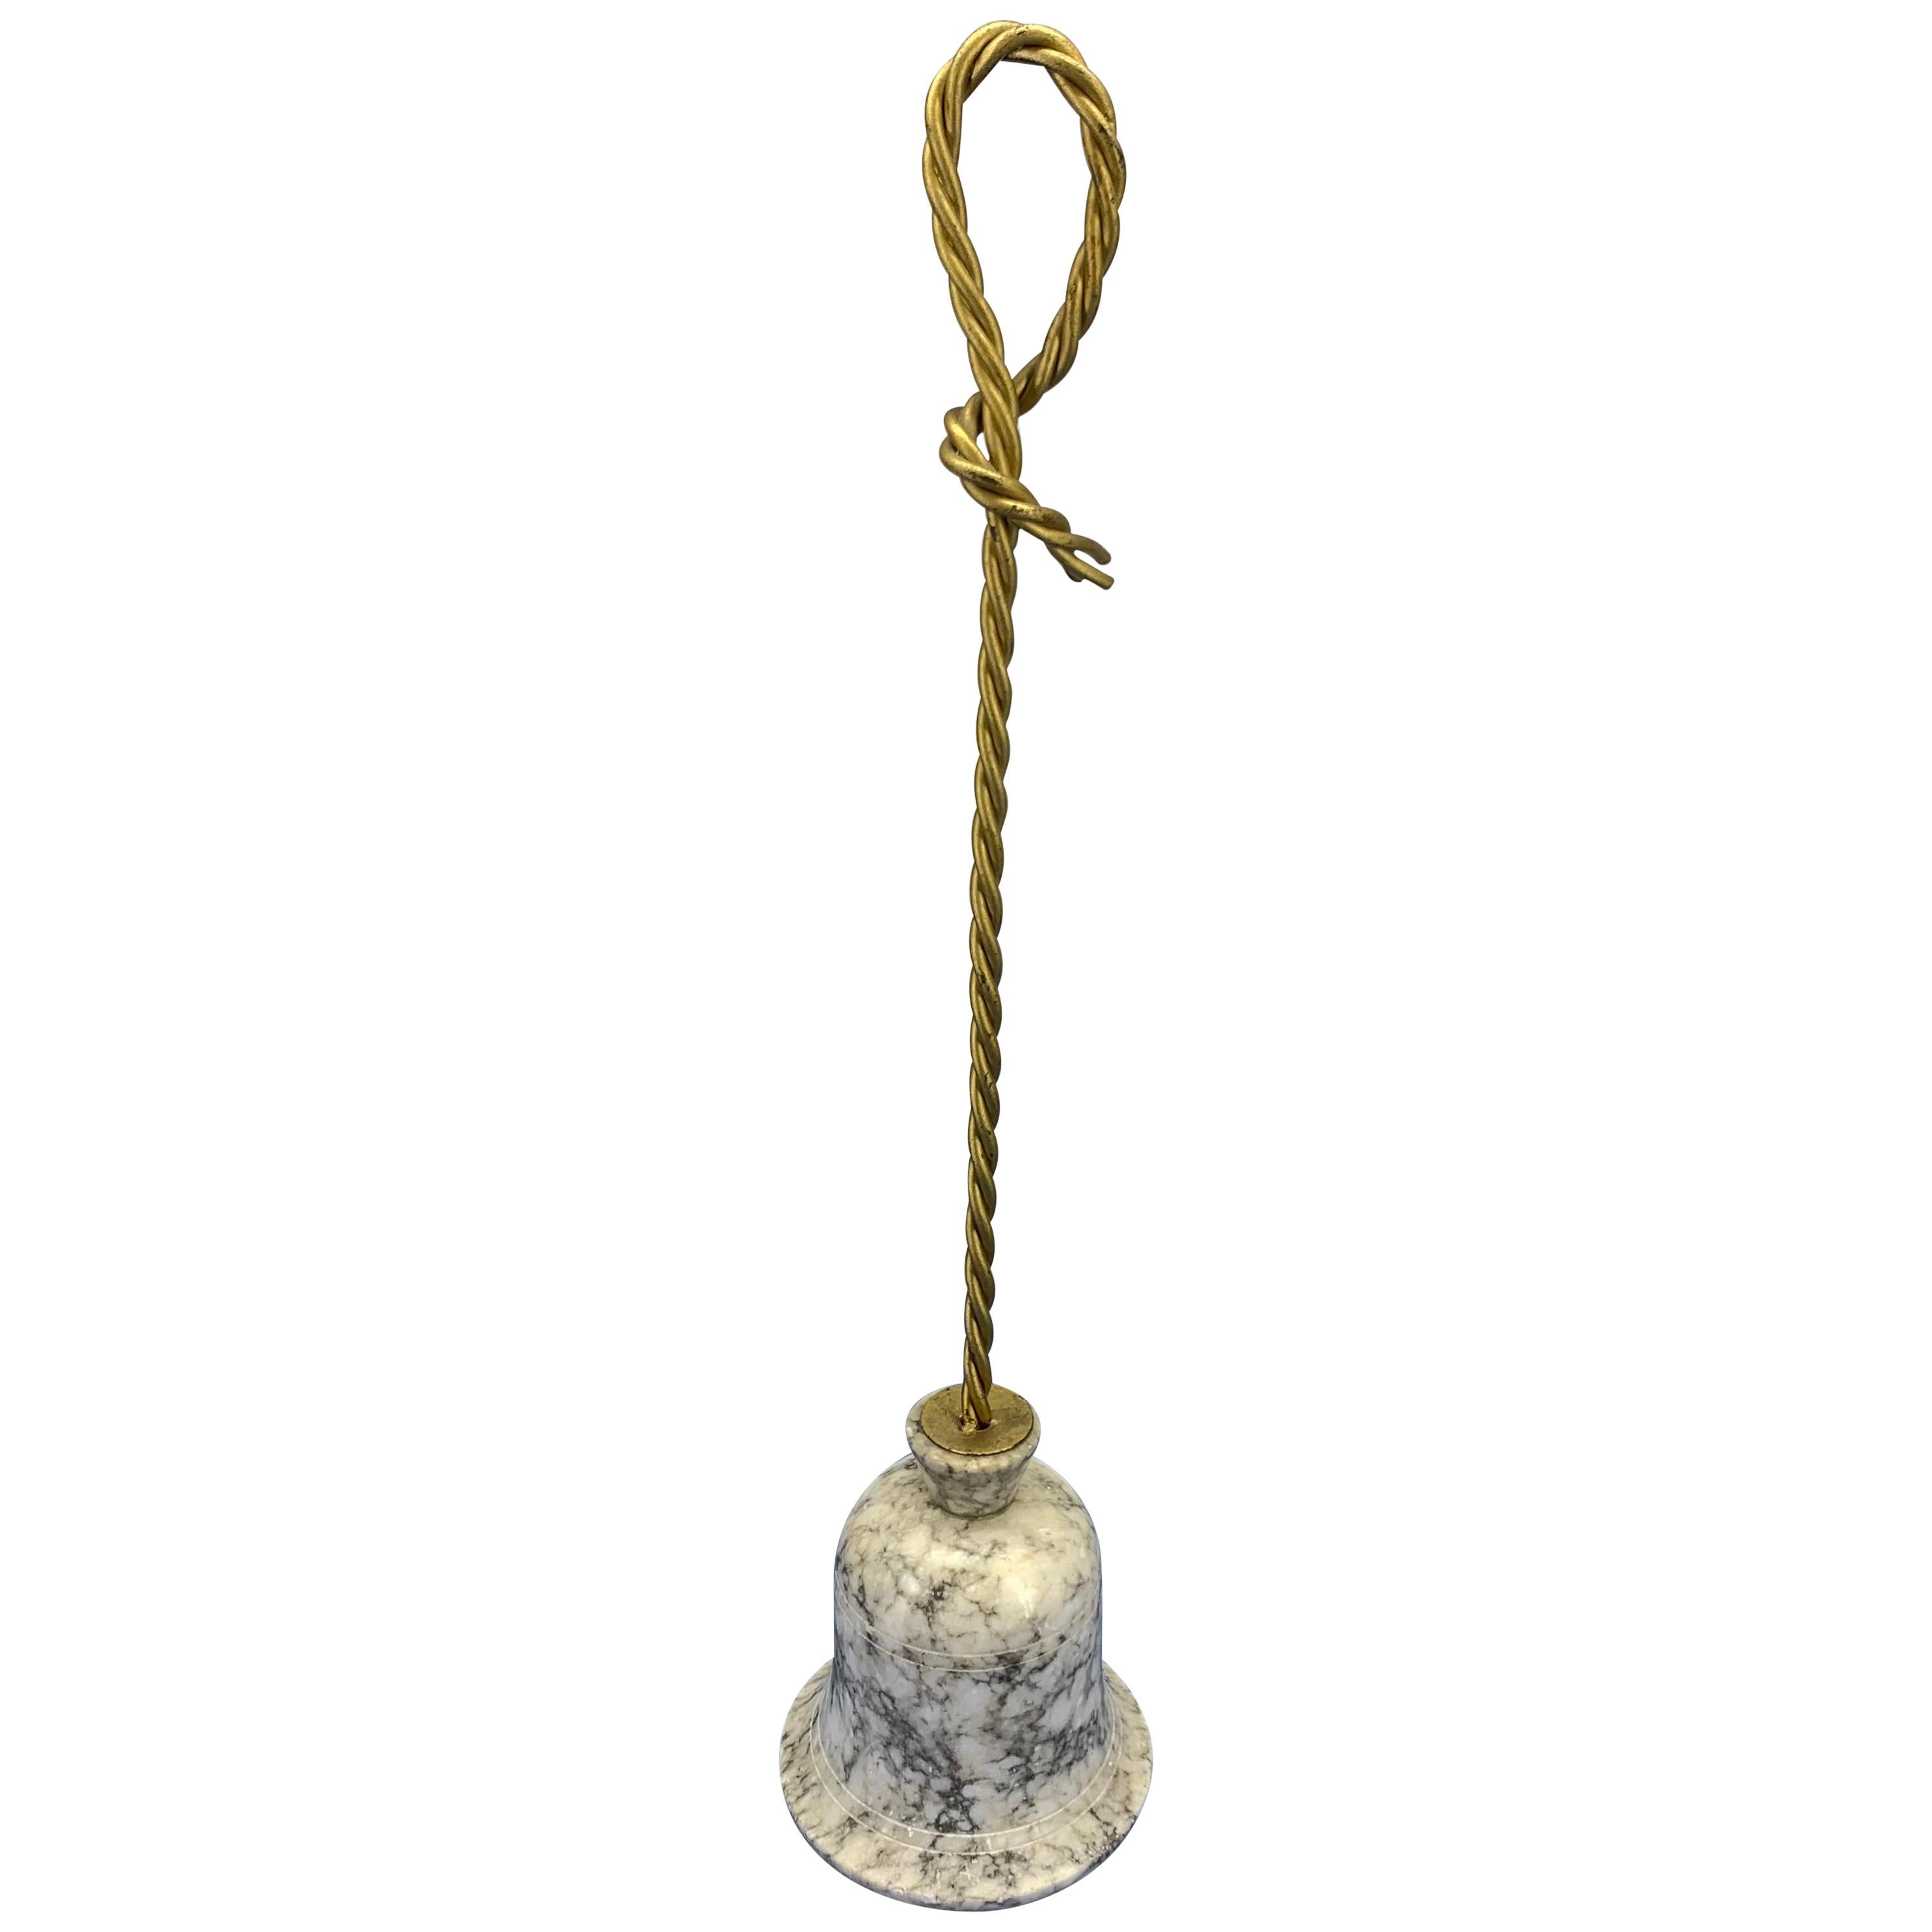 Hollywood Regency marble and gilded roped metal door stopper.